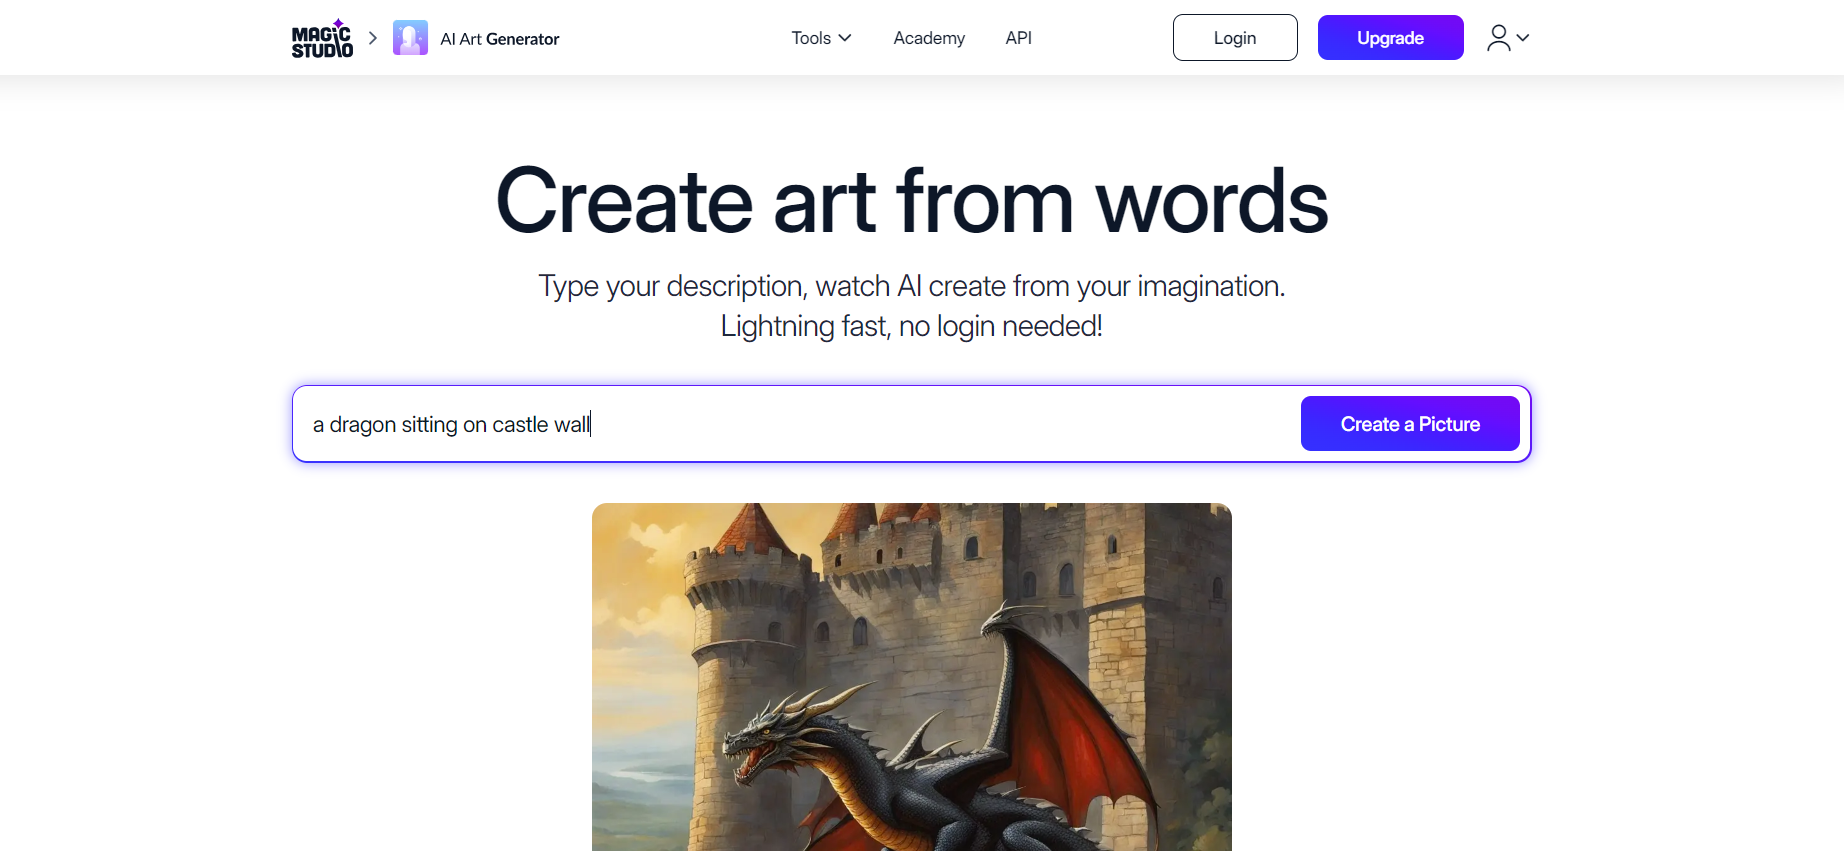 AI Art Generator by Magic Studio helps you to create AI art by just inserting a basic prompt